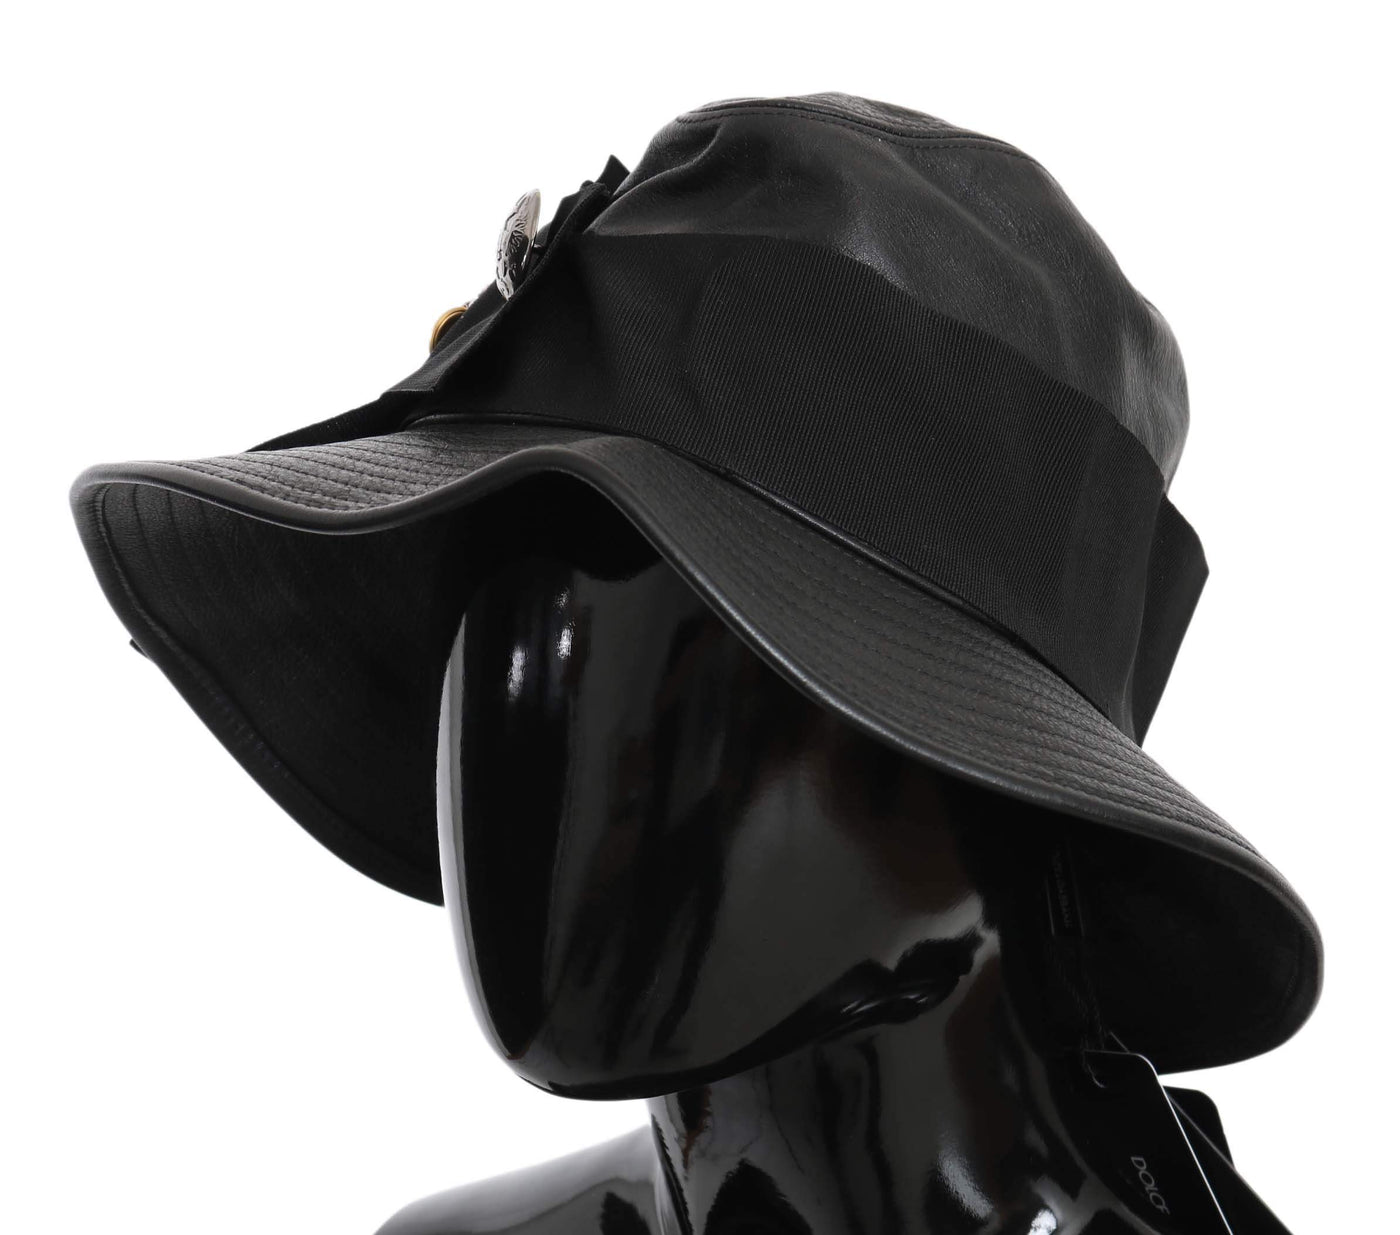 Dolce & Gabbana  Black Leather DG Coin Crystal Wide Brim Hat #women, 56 cm|XS, 58 cm|M, Accessories - New Arrivals, Black, Brand_Dolce & Gabbana, Catch, Dolce & Gabbana, feed-agegroup-adult, feed-color-black, feed-gender-female, feed-size-56 cm|XS, Gender_Women, Hats - Women - Accessories, Kogan at SEYMAYKA